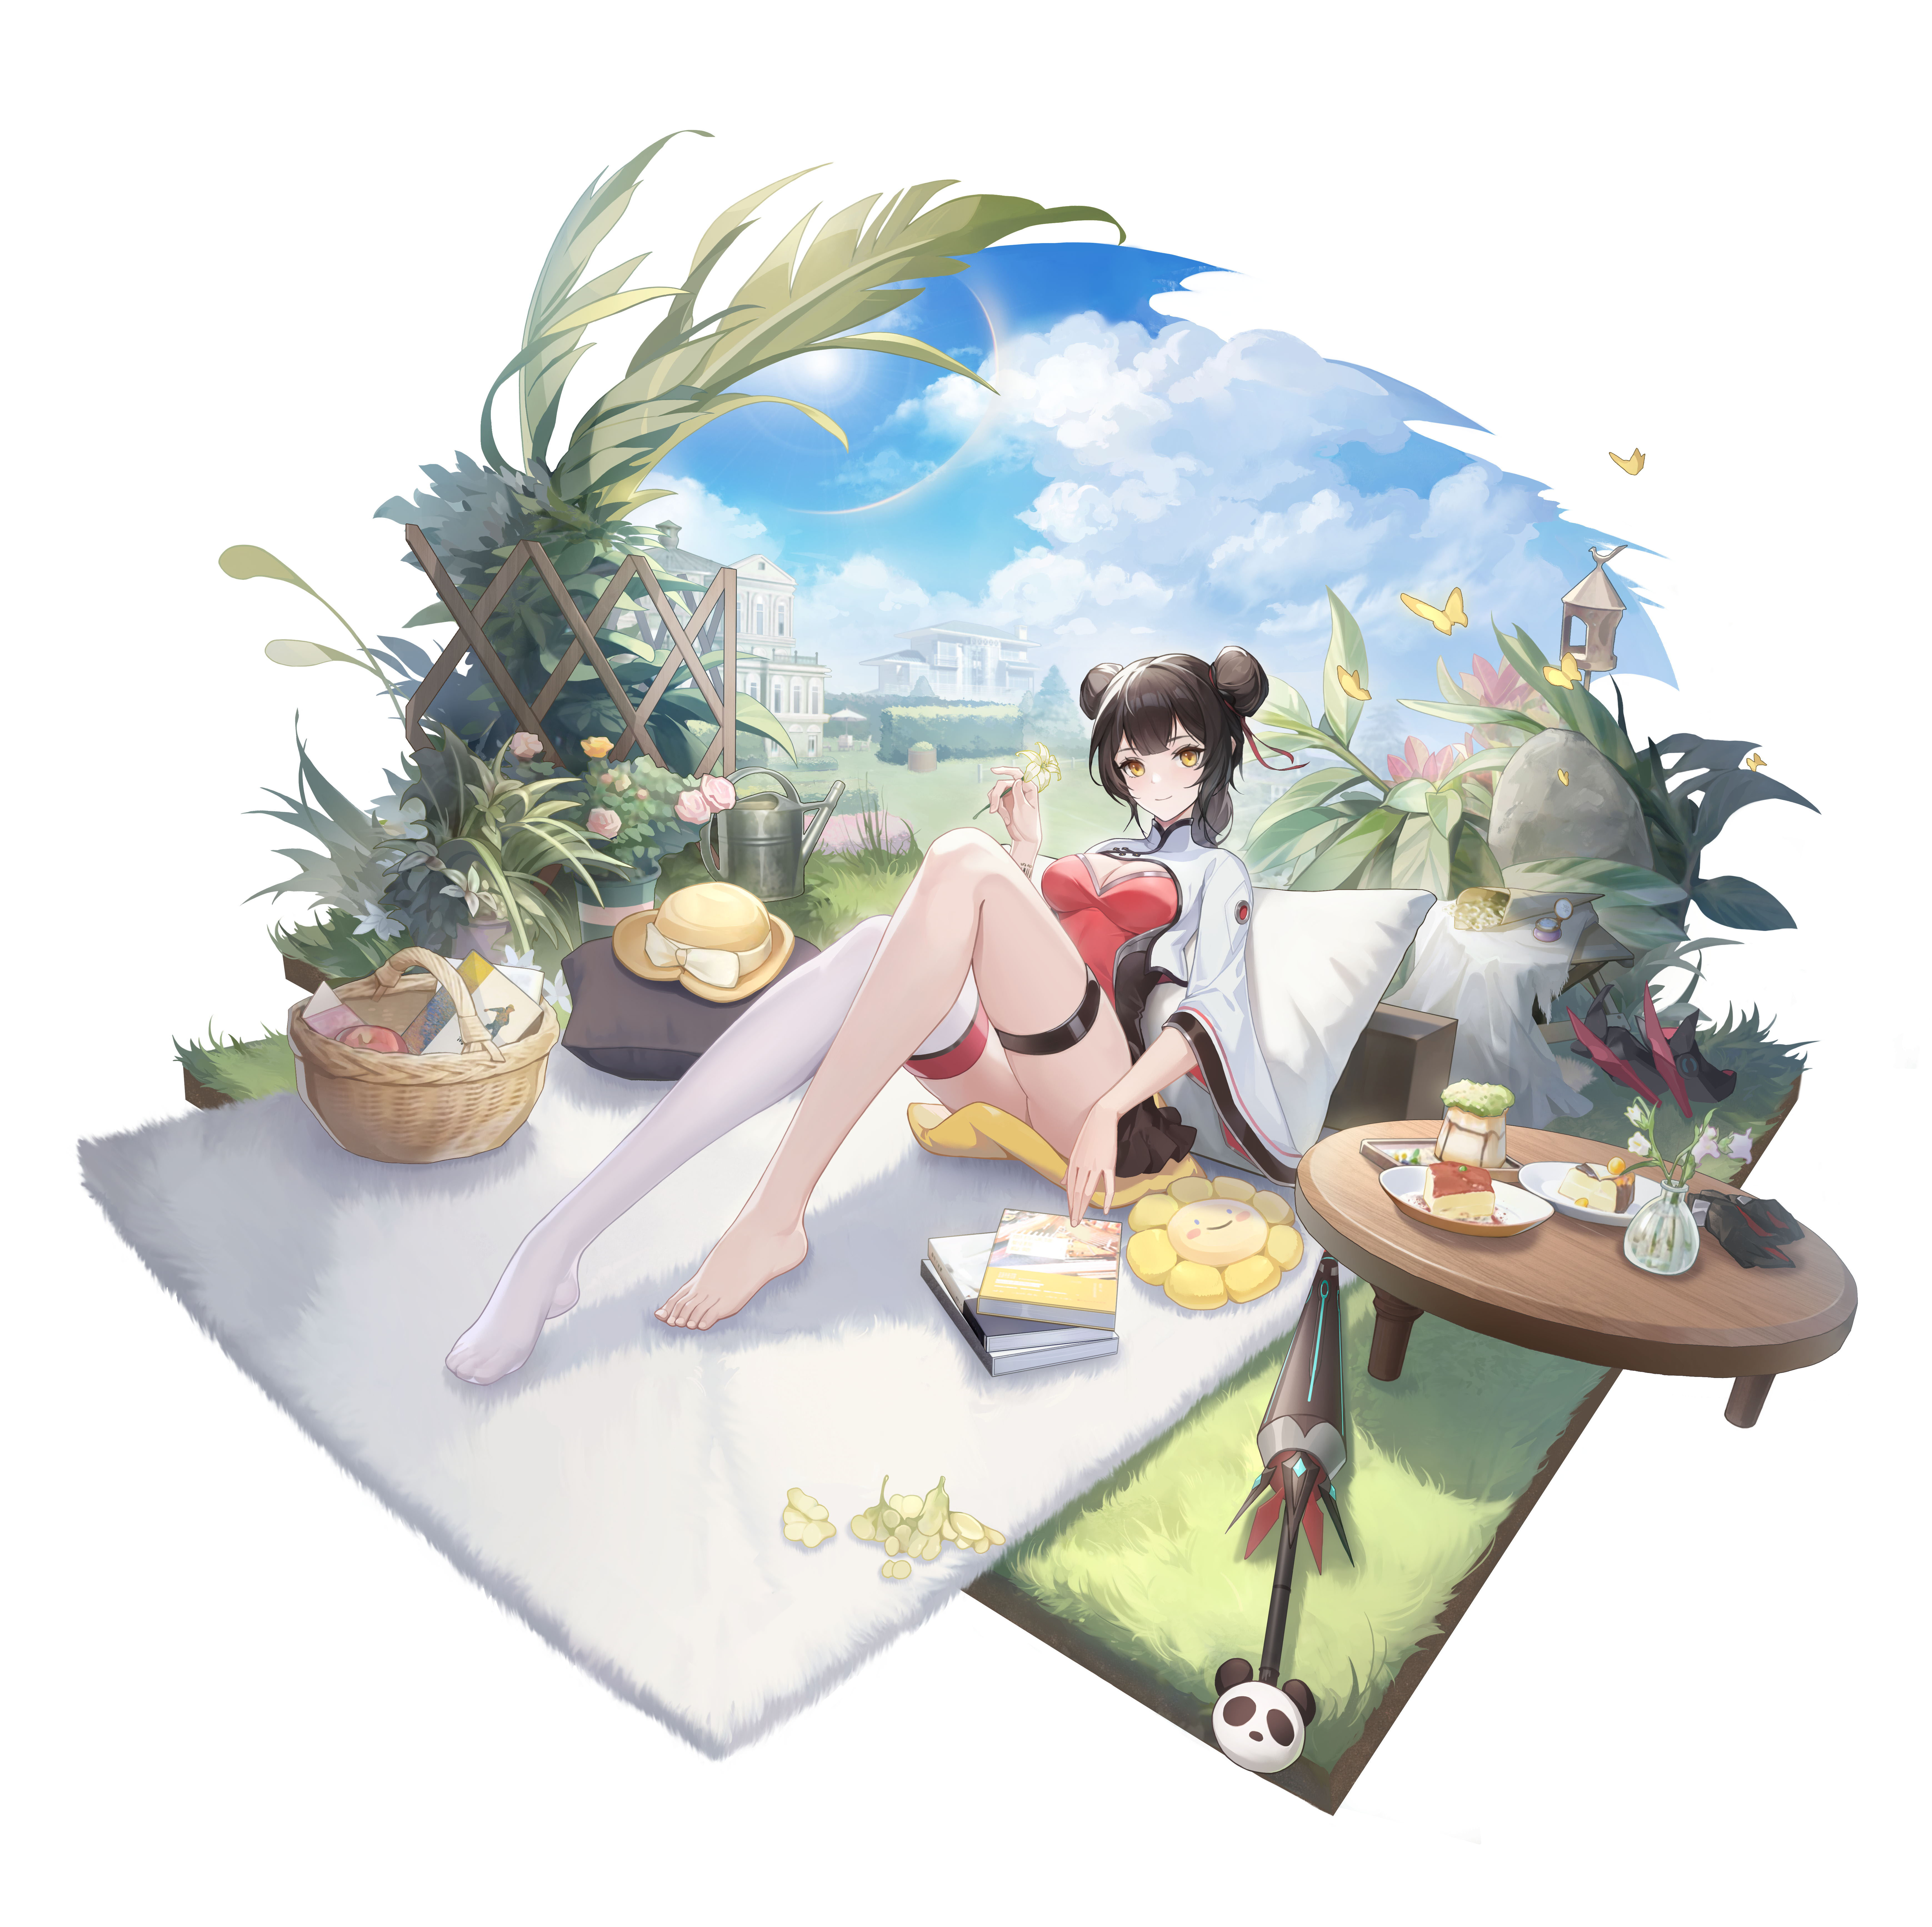 Anime 6955x6936 CODE: SEED - A Song of Spark Fei Hung Wong (Code: Seed) lying down hairbun odango picnic basket anime girls stockings lying on back flowers food simple background sky white background feet looking at viewer grass dress missing stocking red dress big boobs cleavage cutout books thigh strap plants leaves orange eyes black hair watering can clouds straw hat cake barefoot smiling blushing butterfly pillow Huanglongen sunlight toes thighs legs